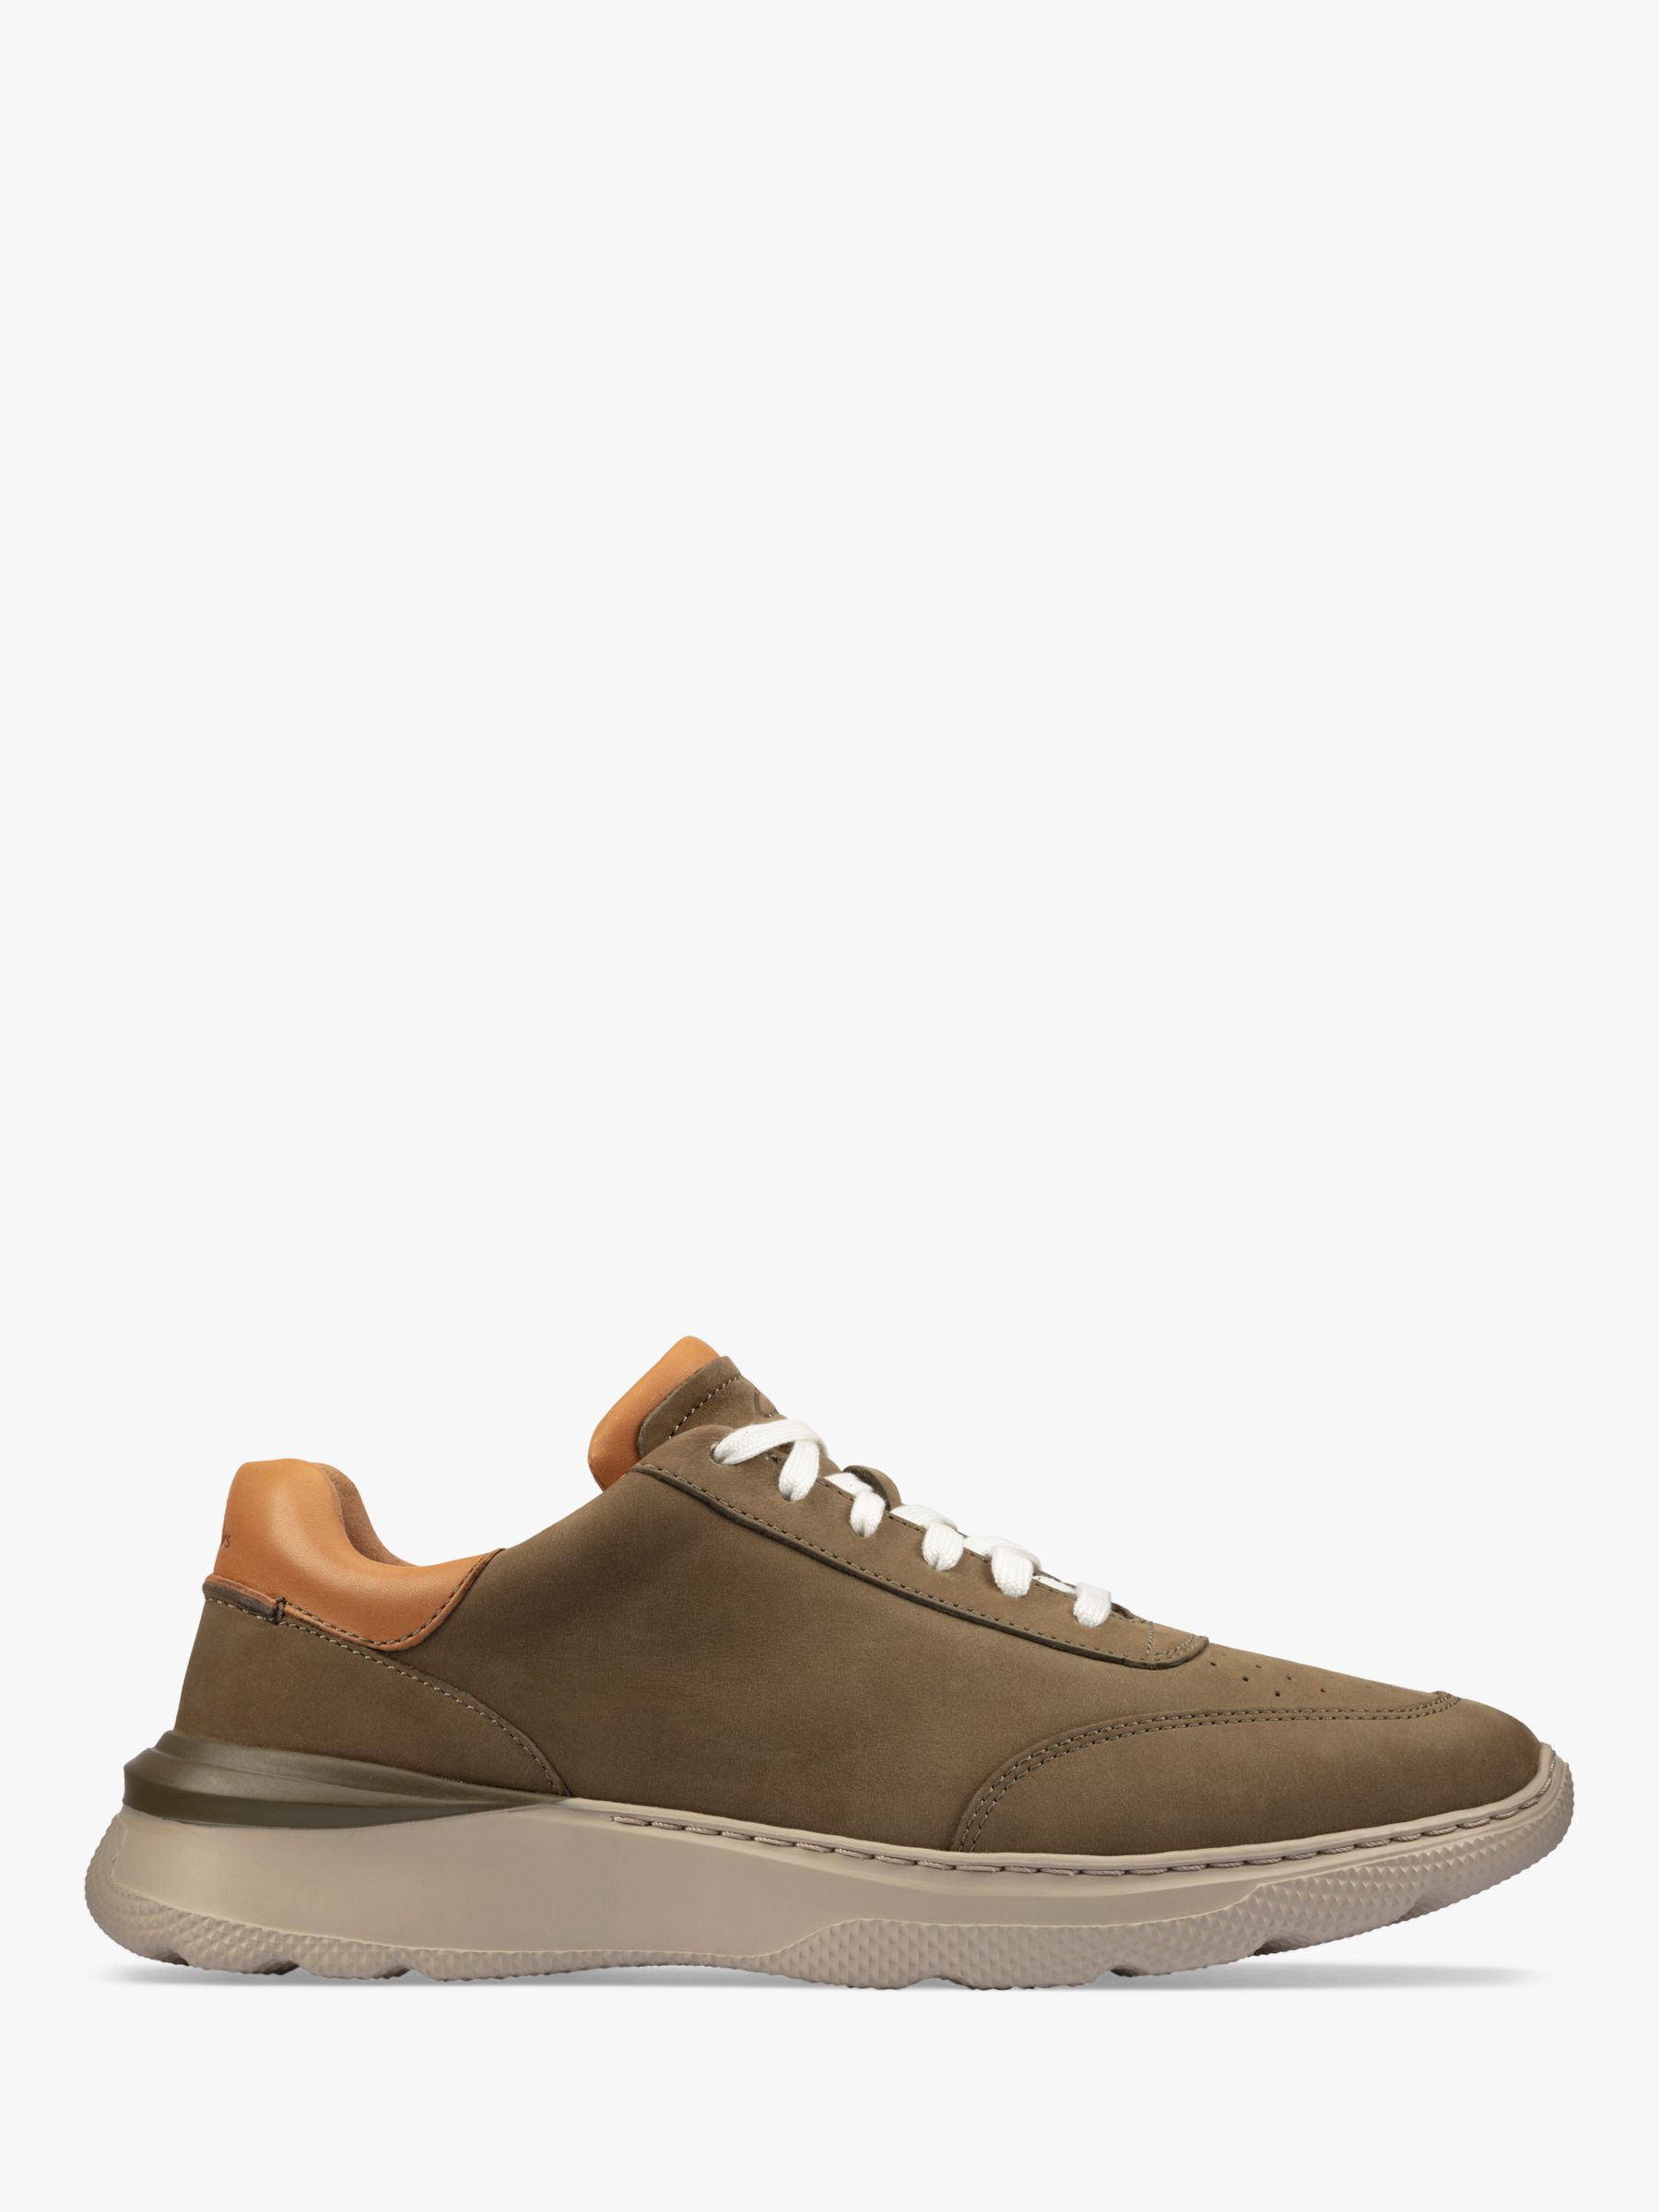 Clarks Sprint Lite Lace Up Nubuck Trainers, Olive